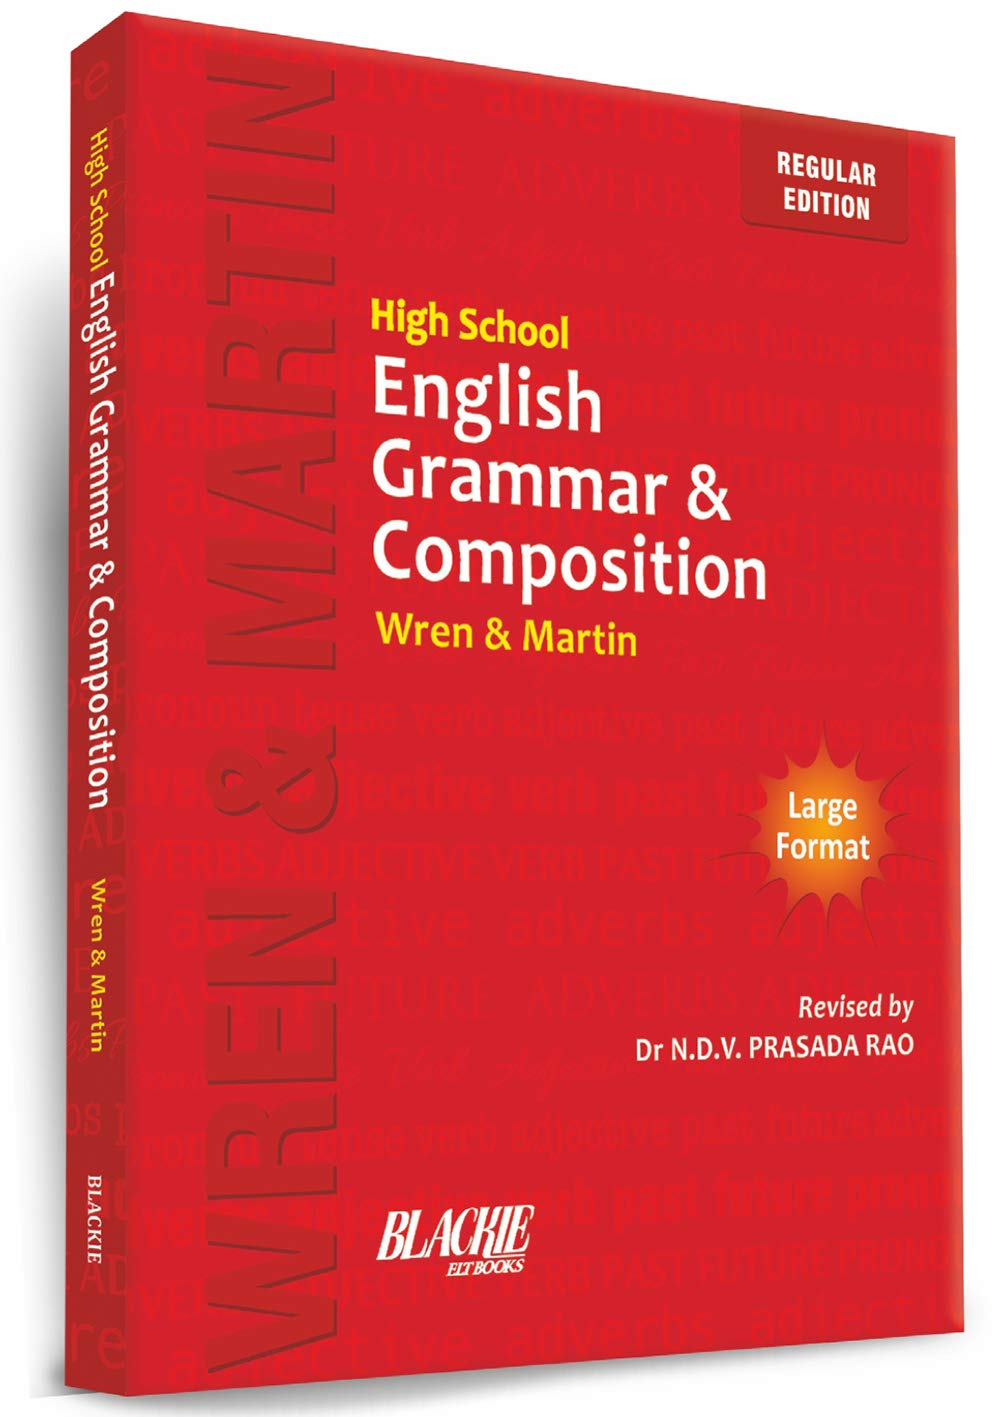 High School English Grammar & Composition by Wren and Martin pdf free